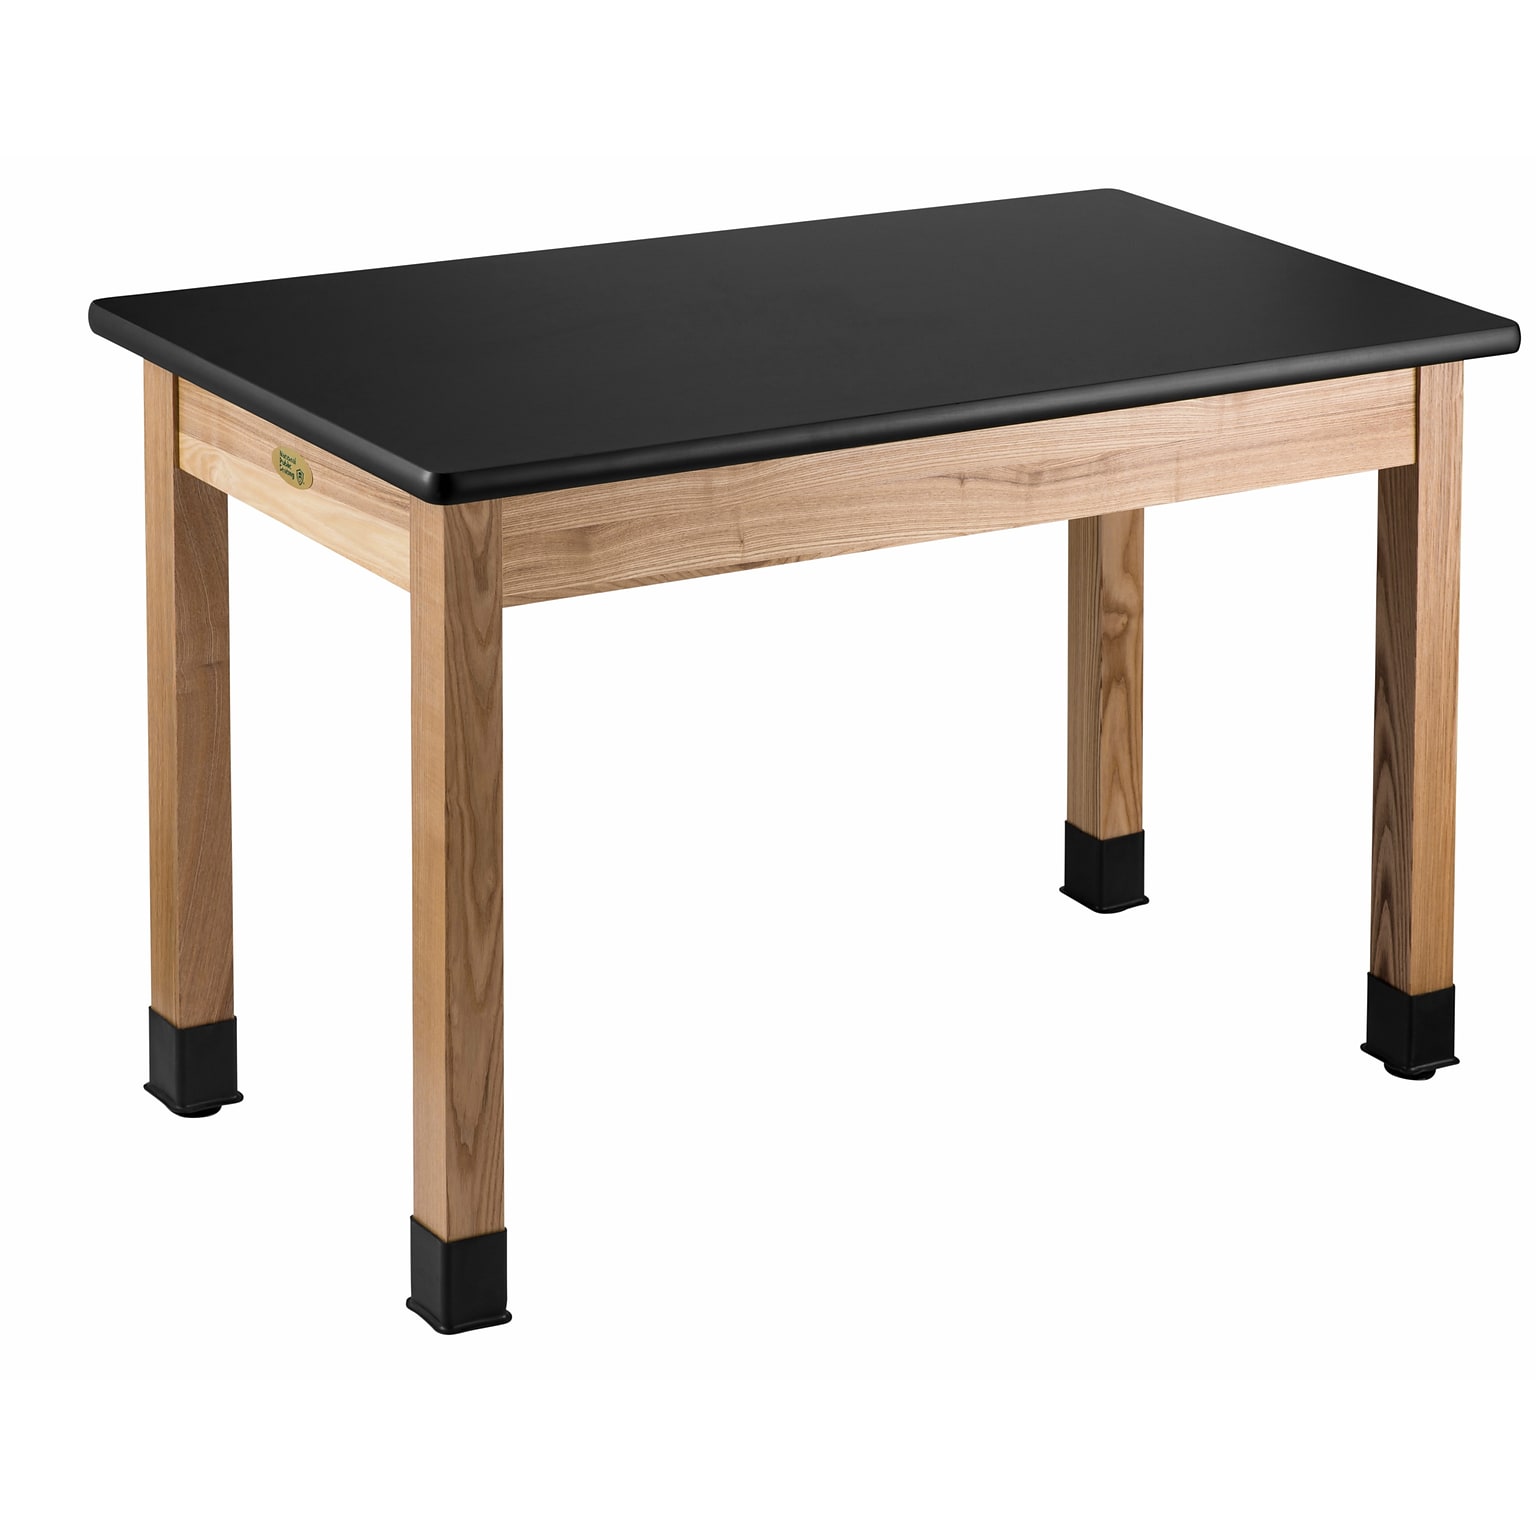 National Public Seating Wood Science Table, Chemical Resistant Series, 24 x 54, Height Adjustable, Black/Ashwood (SLT1-2454C)